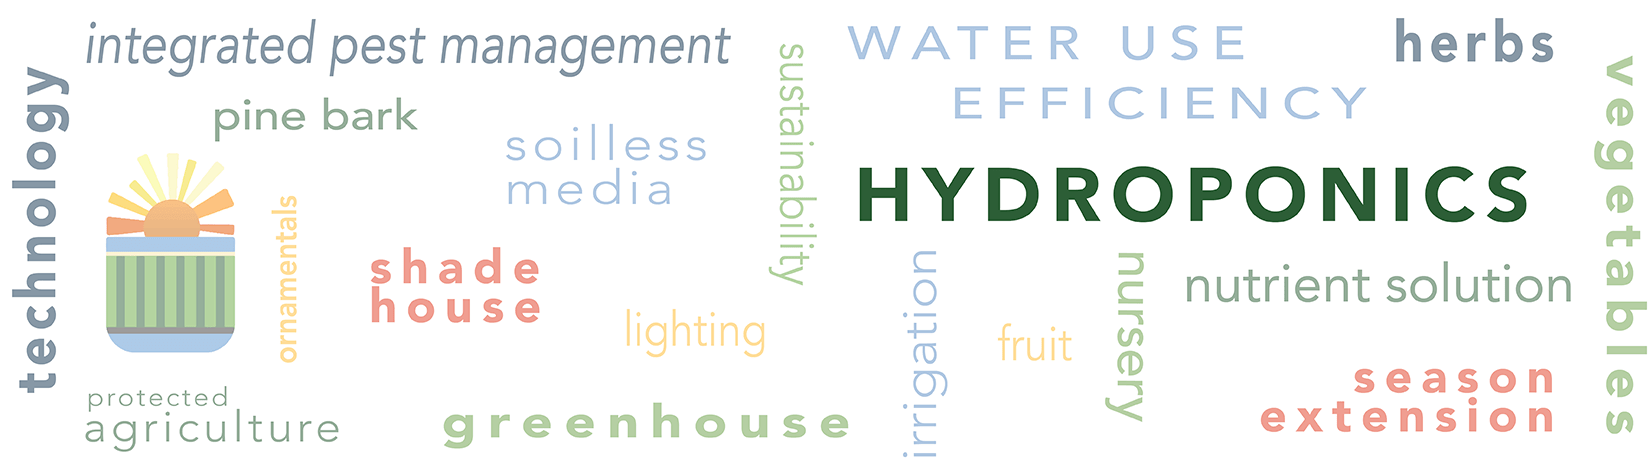 banner displaying the word hydroponic surrounded Urban Agriculture, Irrigation, Technoogy, integrated pest management, business and marketing, food safety, protected agriculture, rergulation and policy, economic impact, livestock production, season extension, sustainability, pasture management, farmscaping and farm systems, postharvest handling, aquaponics